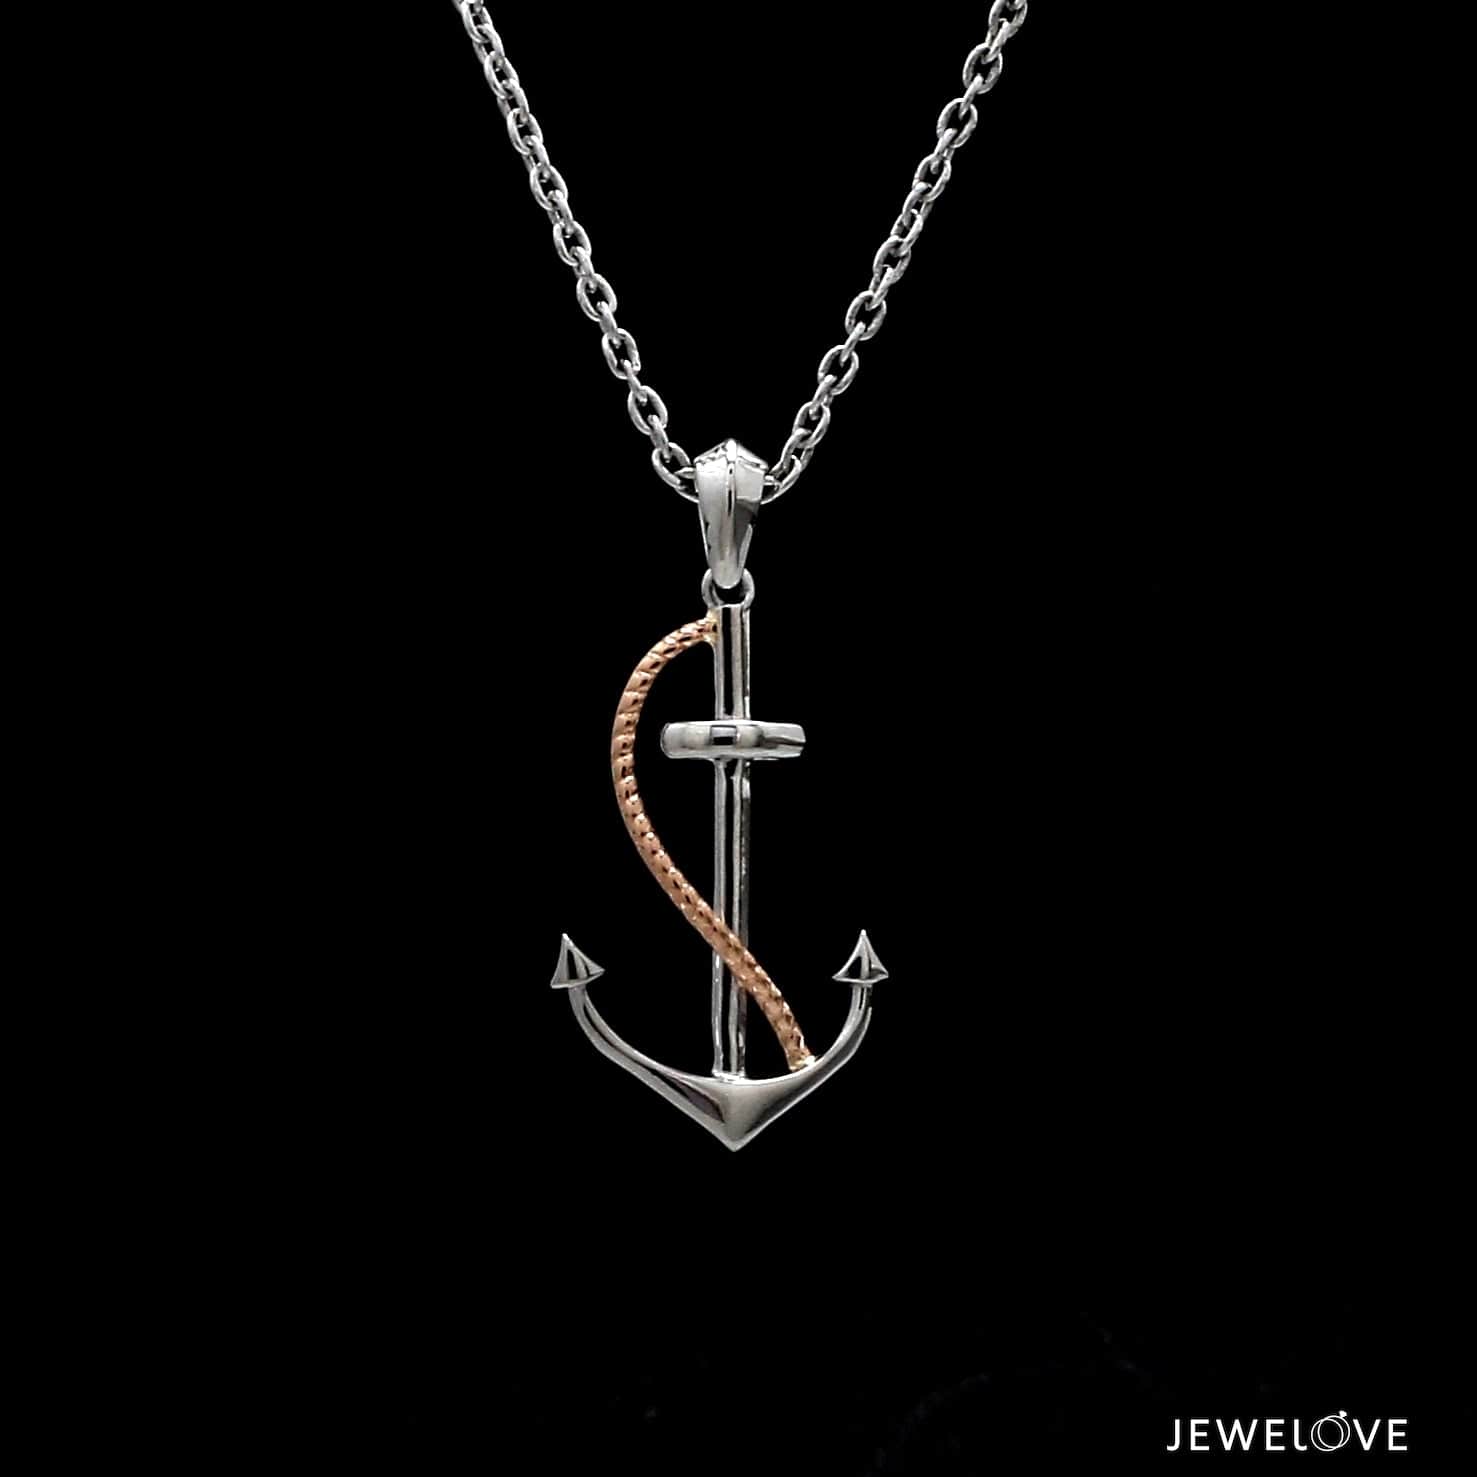 Anchor Necklace For Men: Amazing Aquatic Wonders Of Nautical Jewelry.